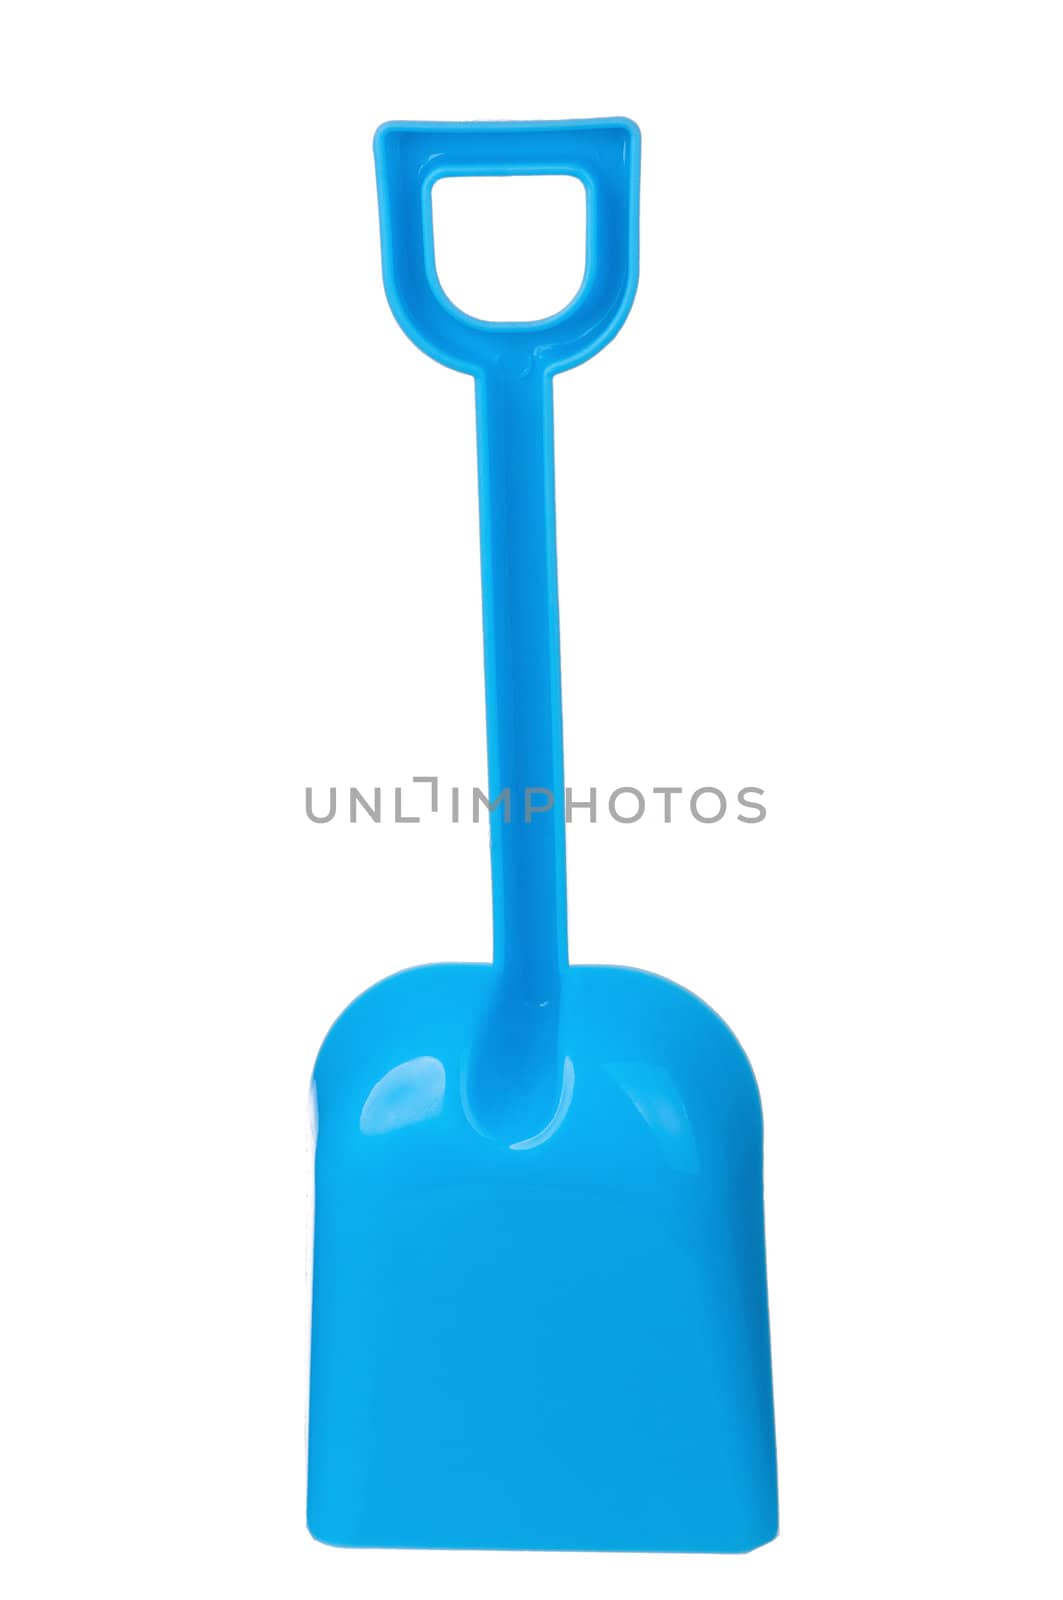 Toy small spade isolated on white background